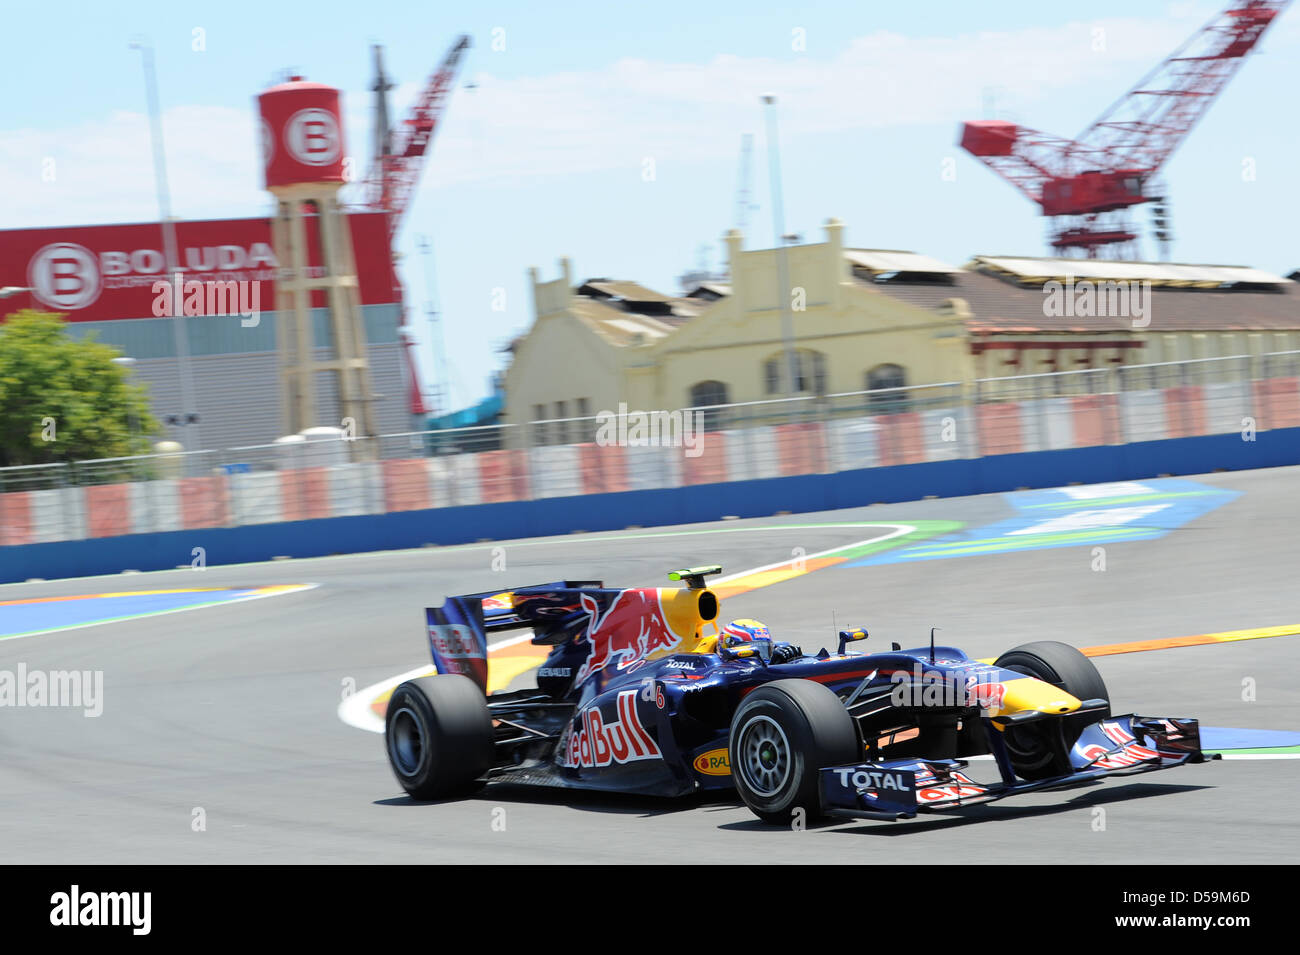 Australian driver  Mark Webber of Red Bull Racing during Qualifying at the street circuit of Valencia, Spain, 26 June 2010. The 2010 Formula 1 Grand Prix of Europe was held on 27 June. Photo: David Ebener Stock Photo